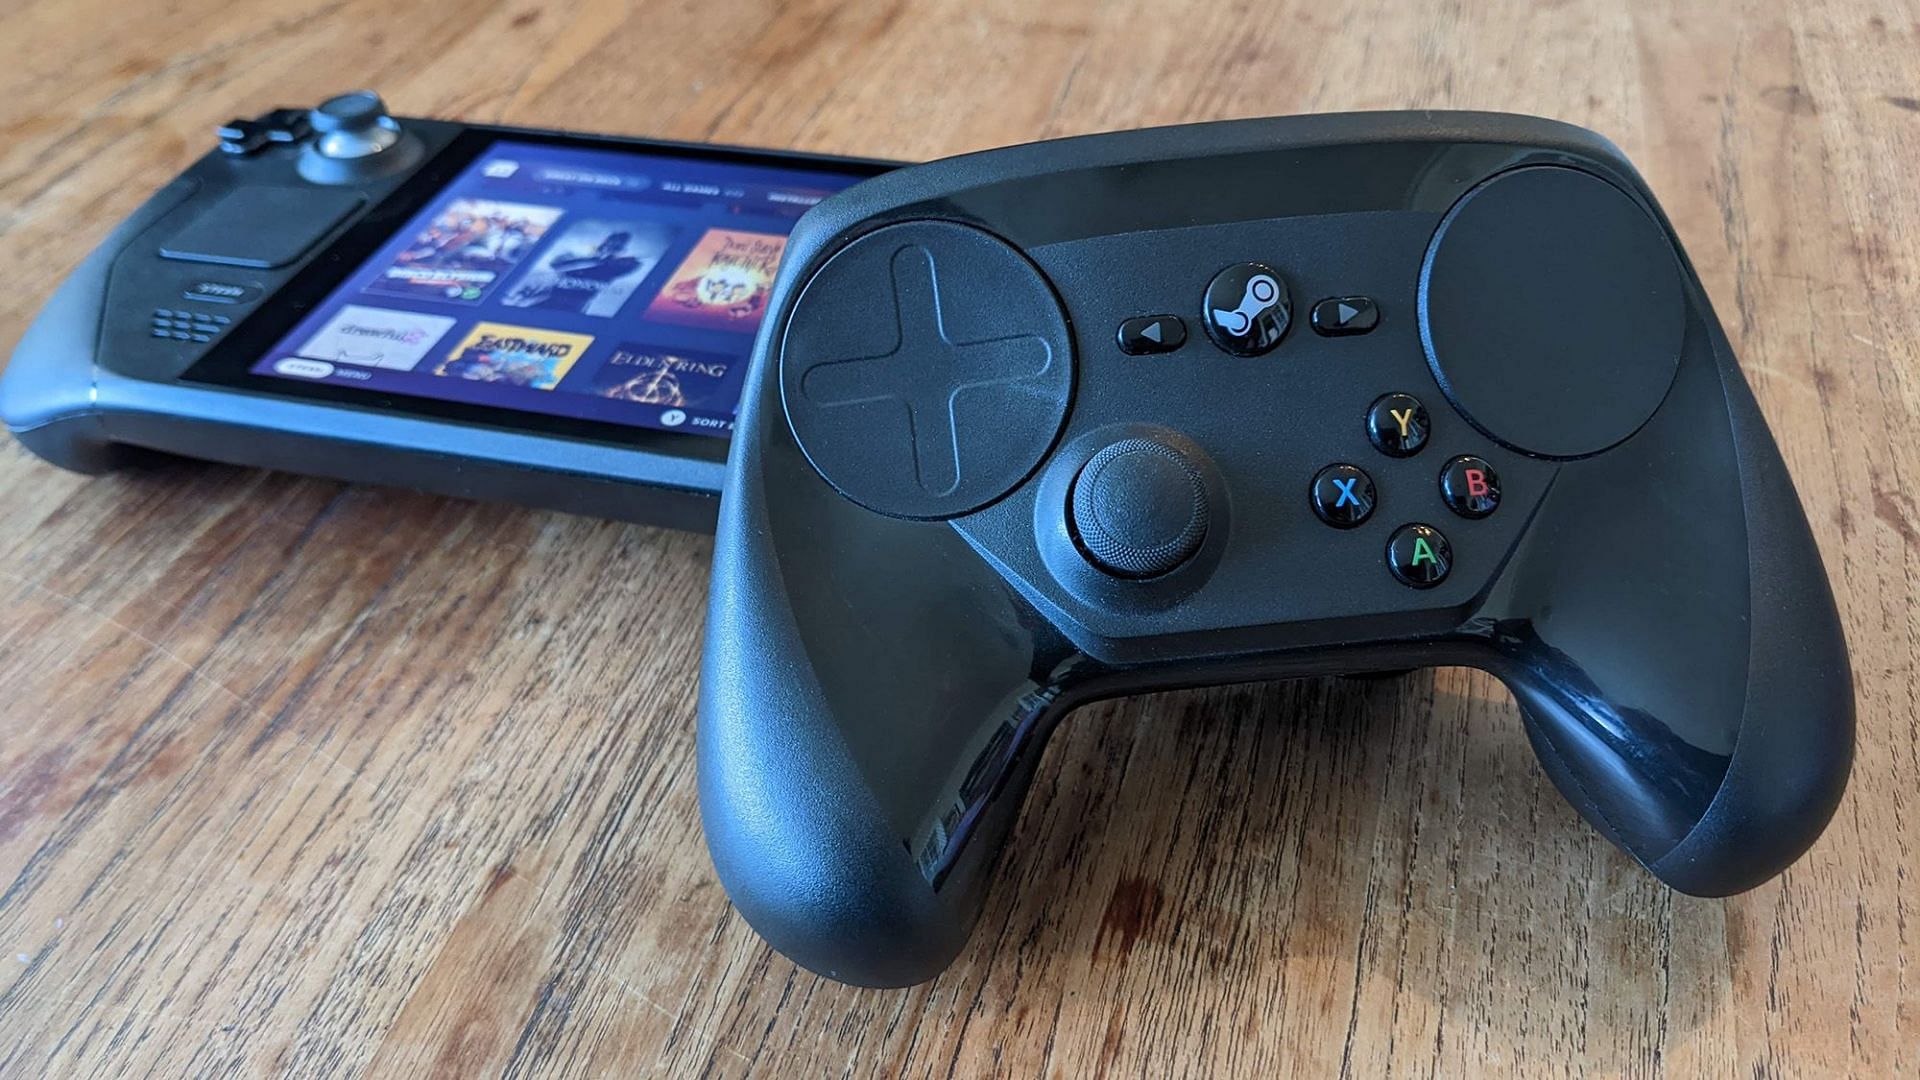 It is easy to connect a controller or gamepad to the Steam Deck (Image via Valve)